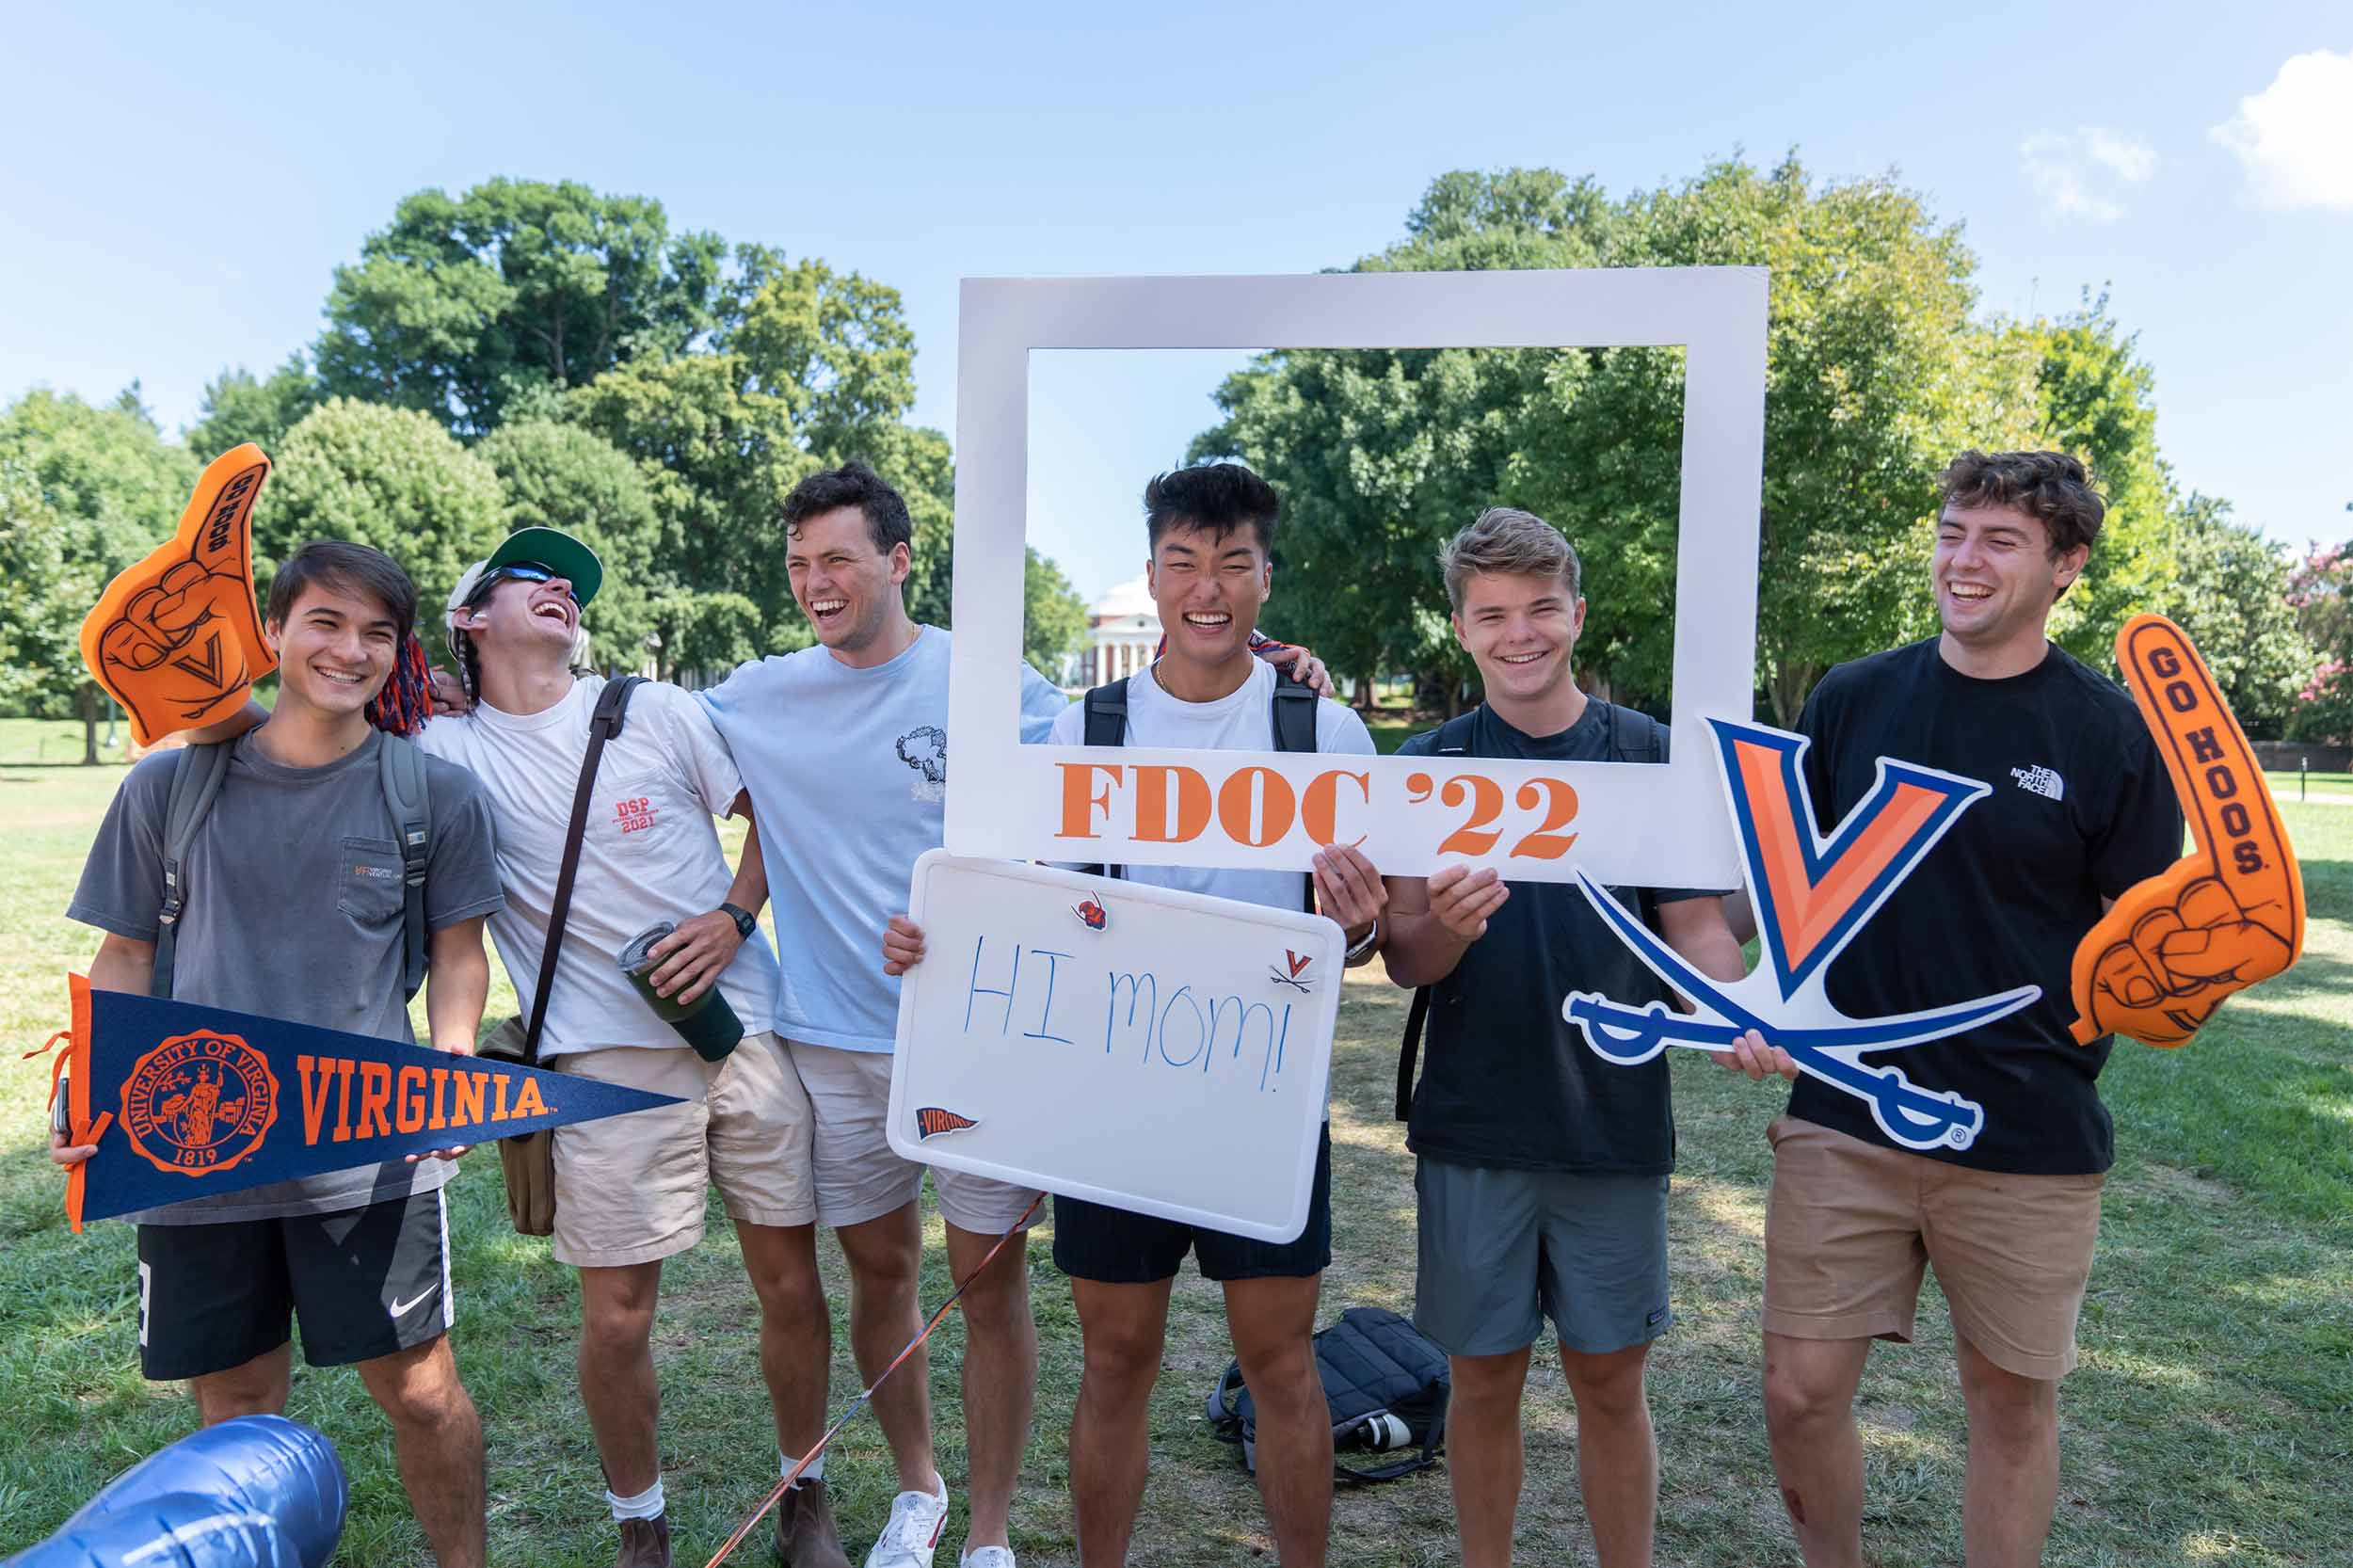 Six laughing students hold foam fingers, a Virginia banner, a whiteboard with Hi Mom written on it, and a frame reading FDOC '22